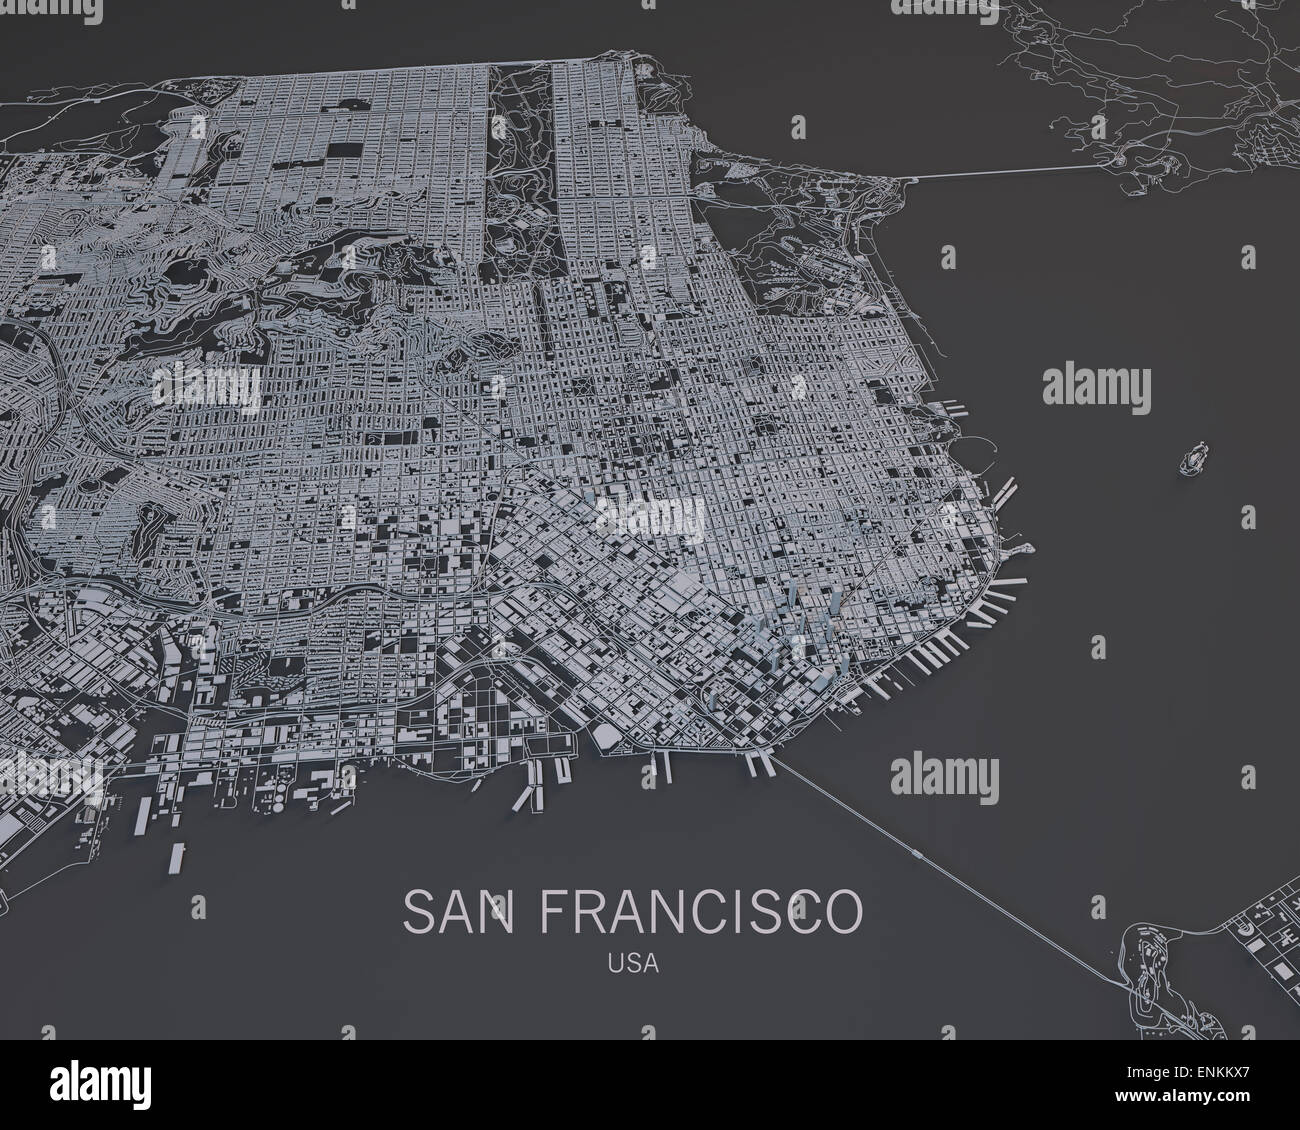 San Francisco Streets And Buildings Map Stock Photo Alamy